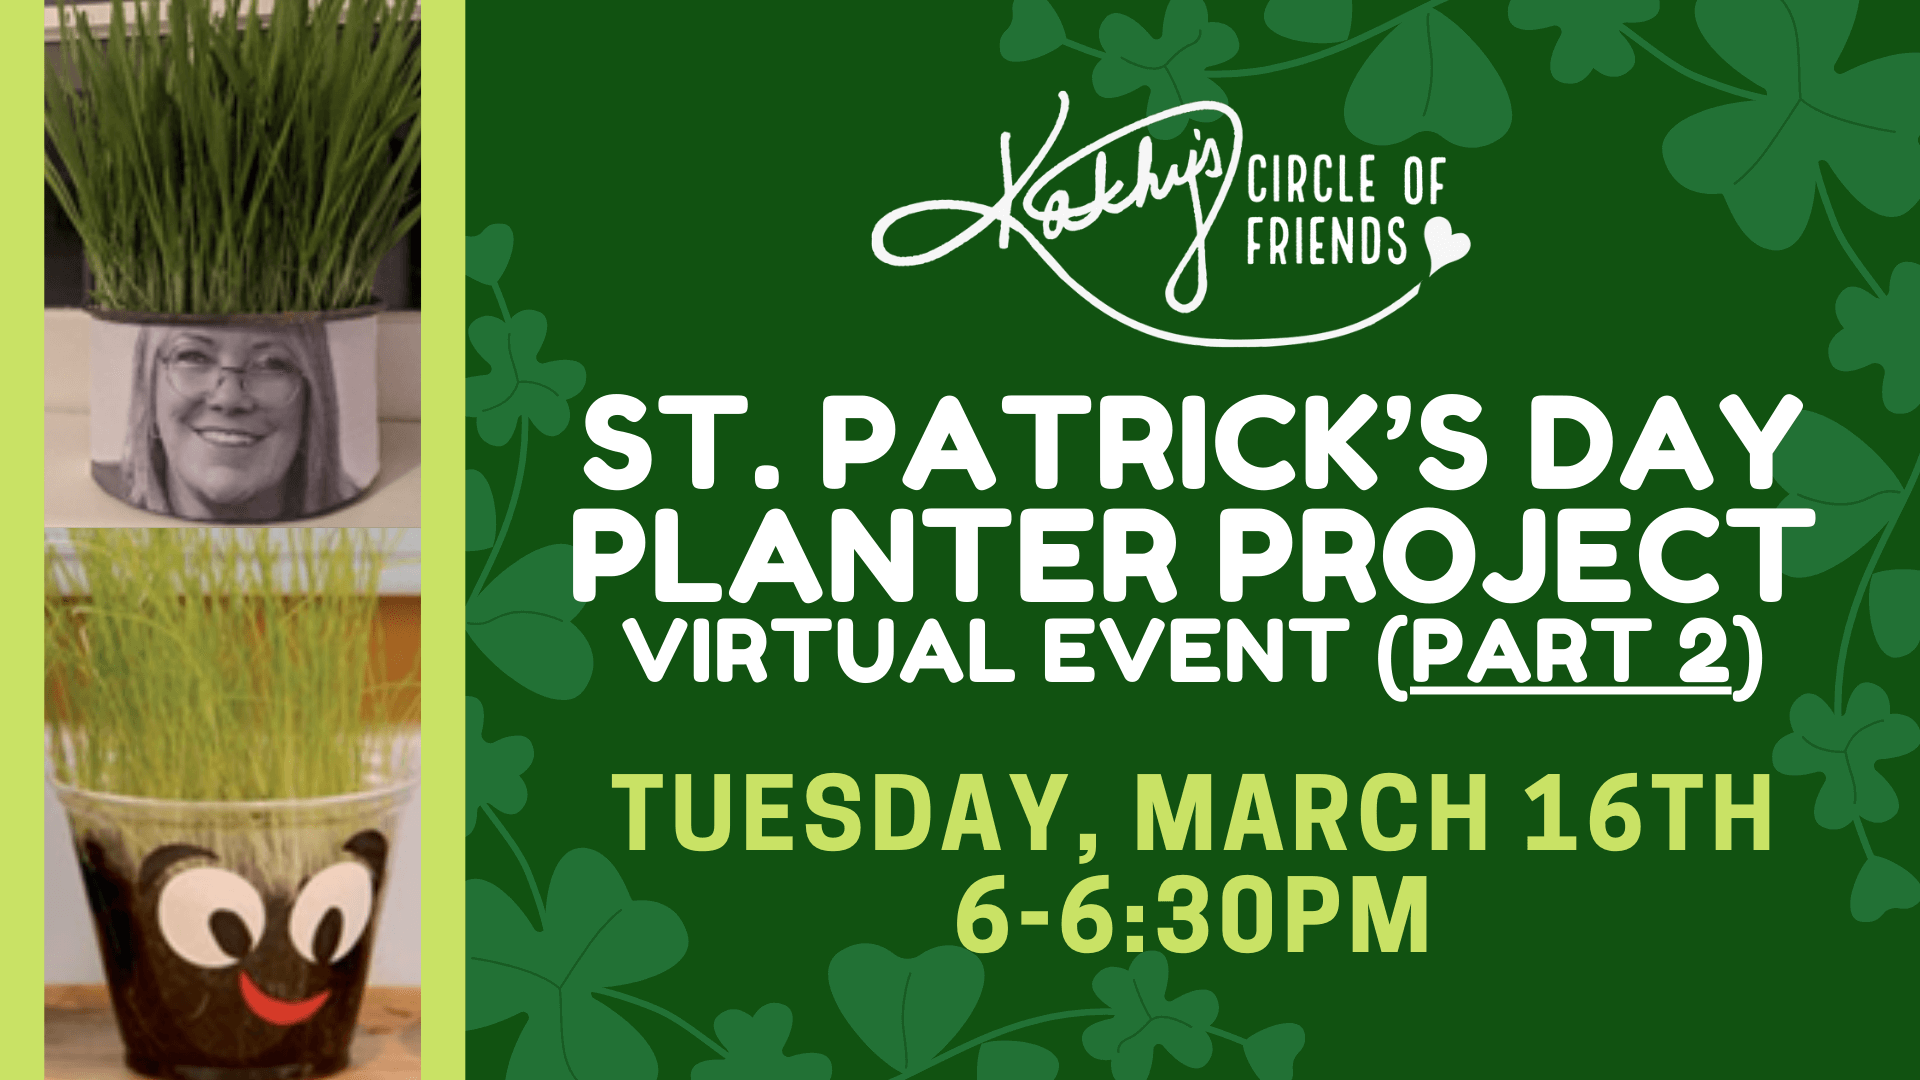 St. Patrick's Day Planter Project | Tuesday March 16th